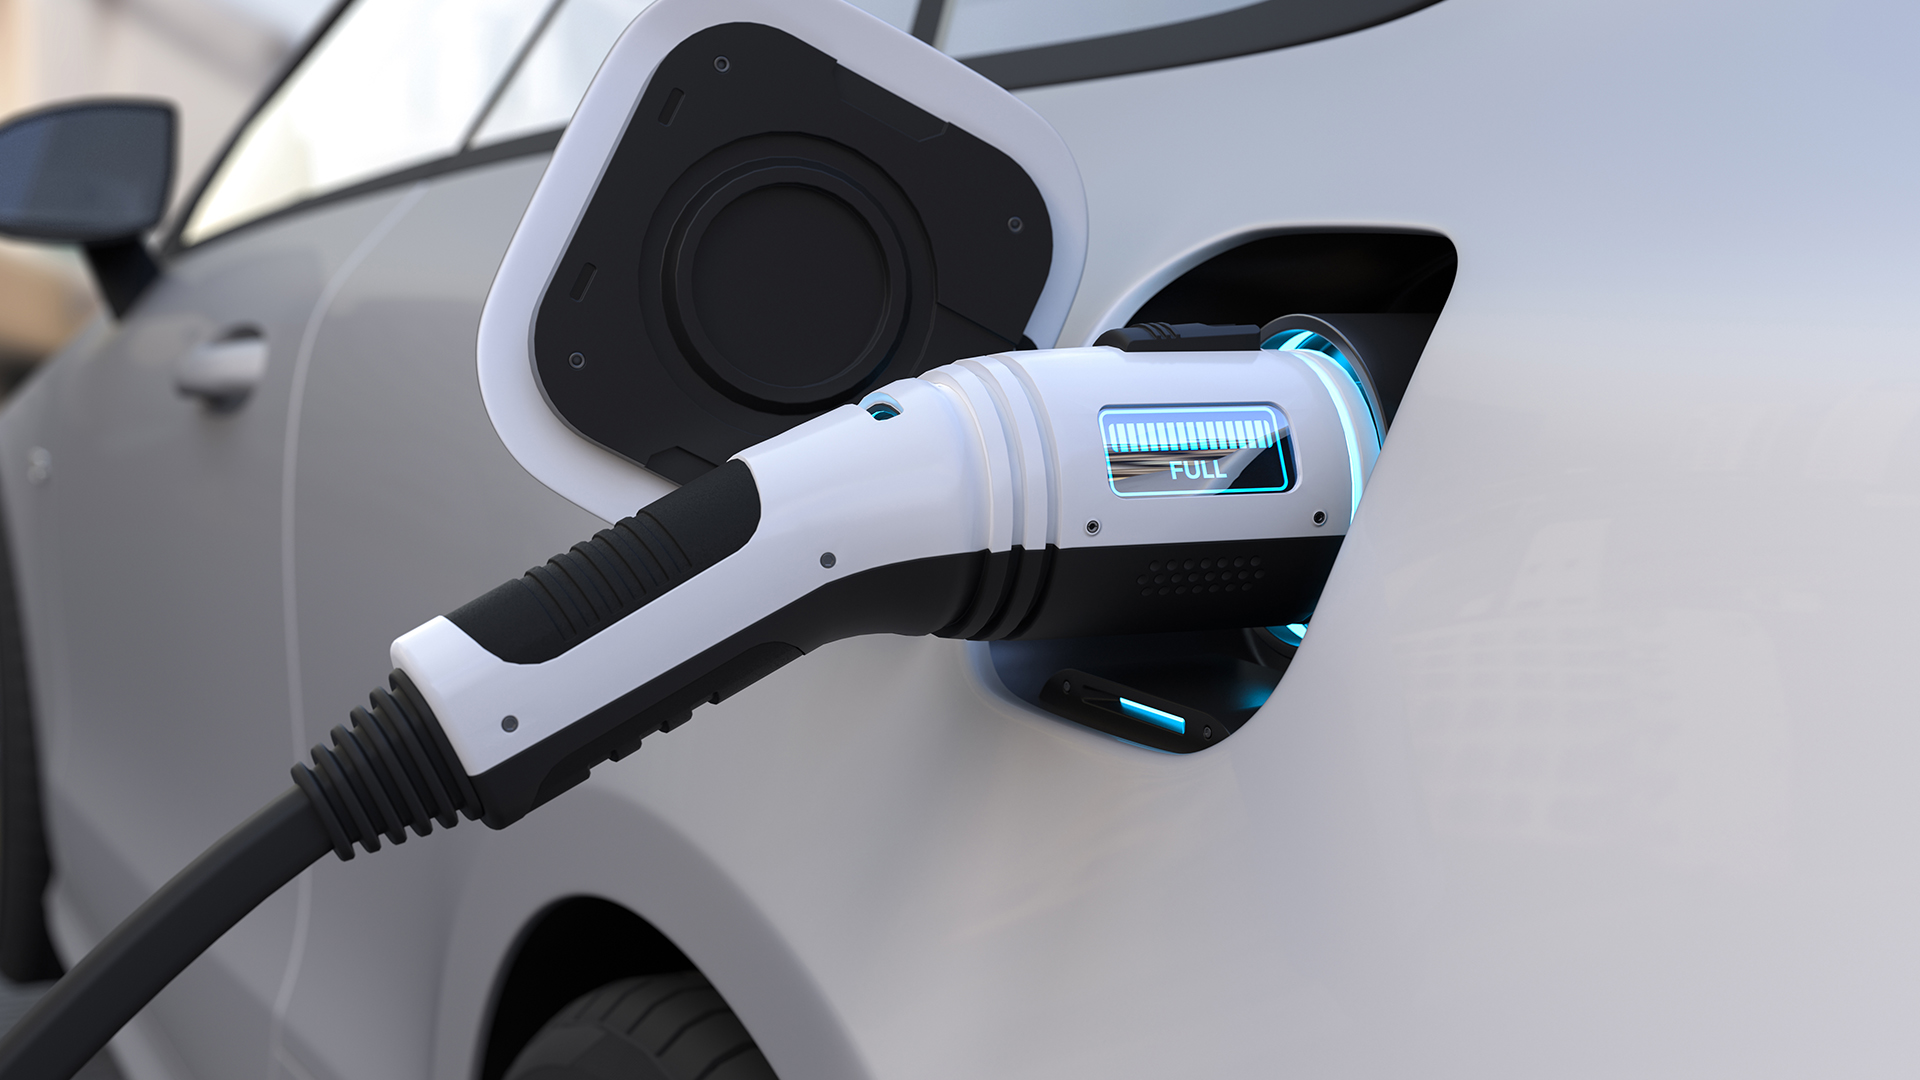 electric car power charging - $5B for 500,000 electric vehicle charging stations across USA, Kamala Harris says